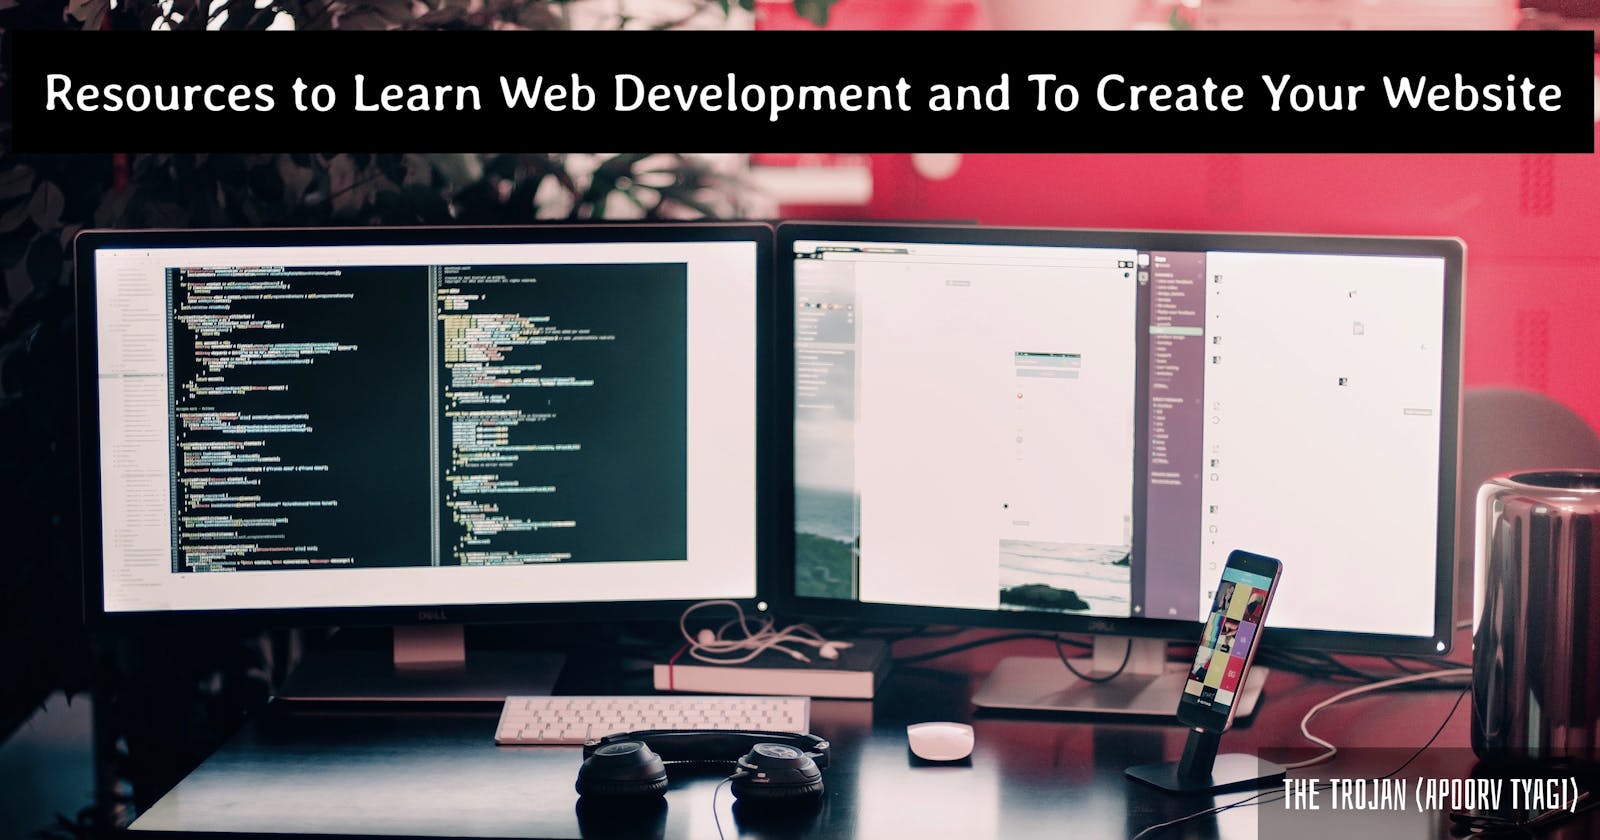 Useful Resources To Learn Web Development & To Create Your Website